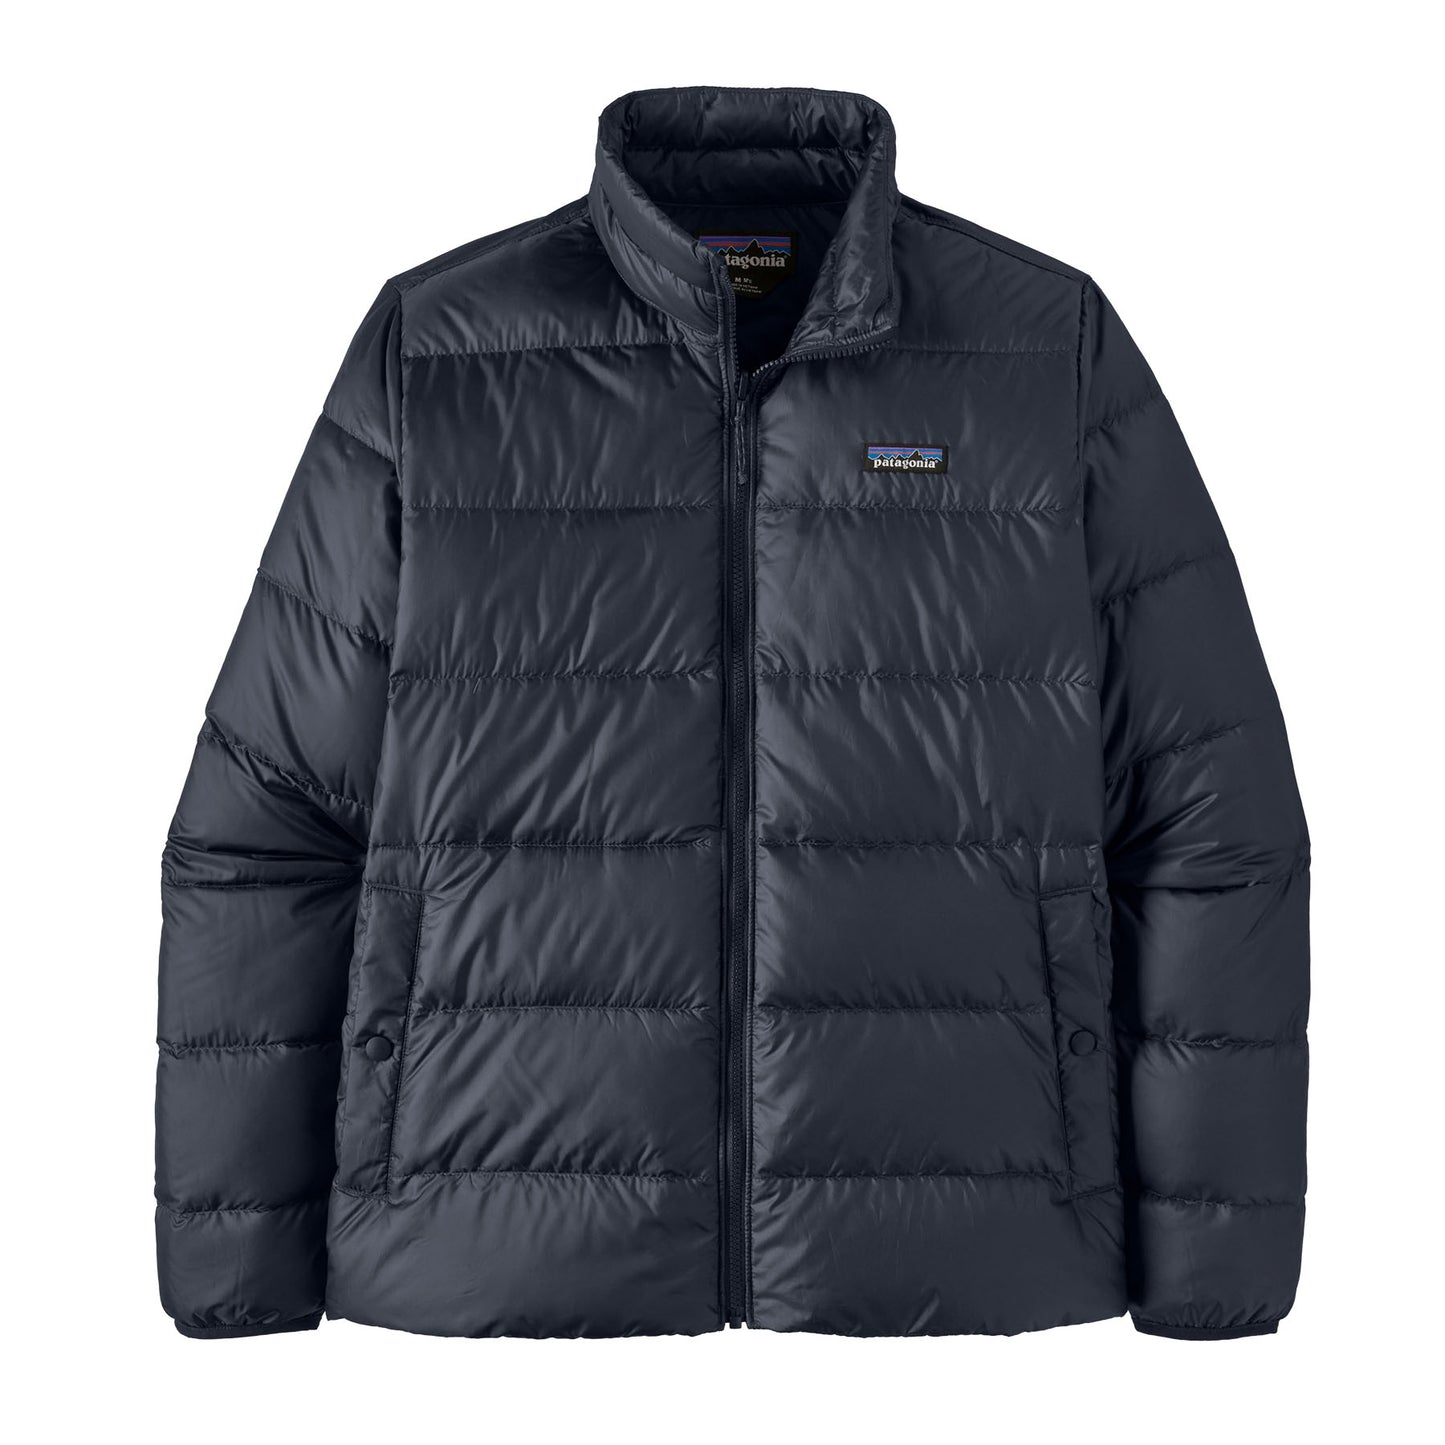 Patagonia Tres 3-In-1 Parka